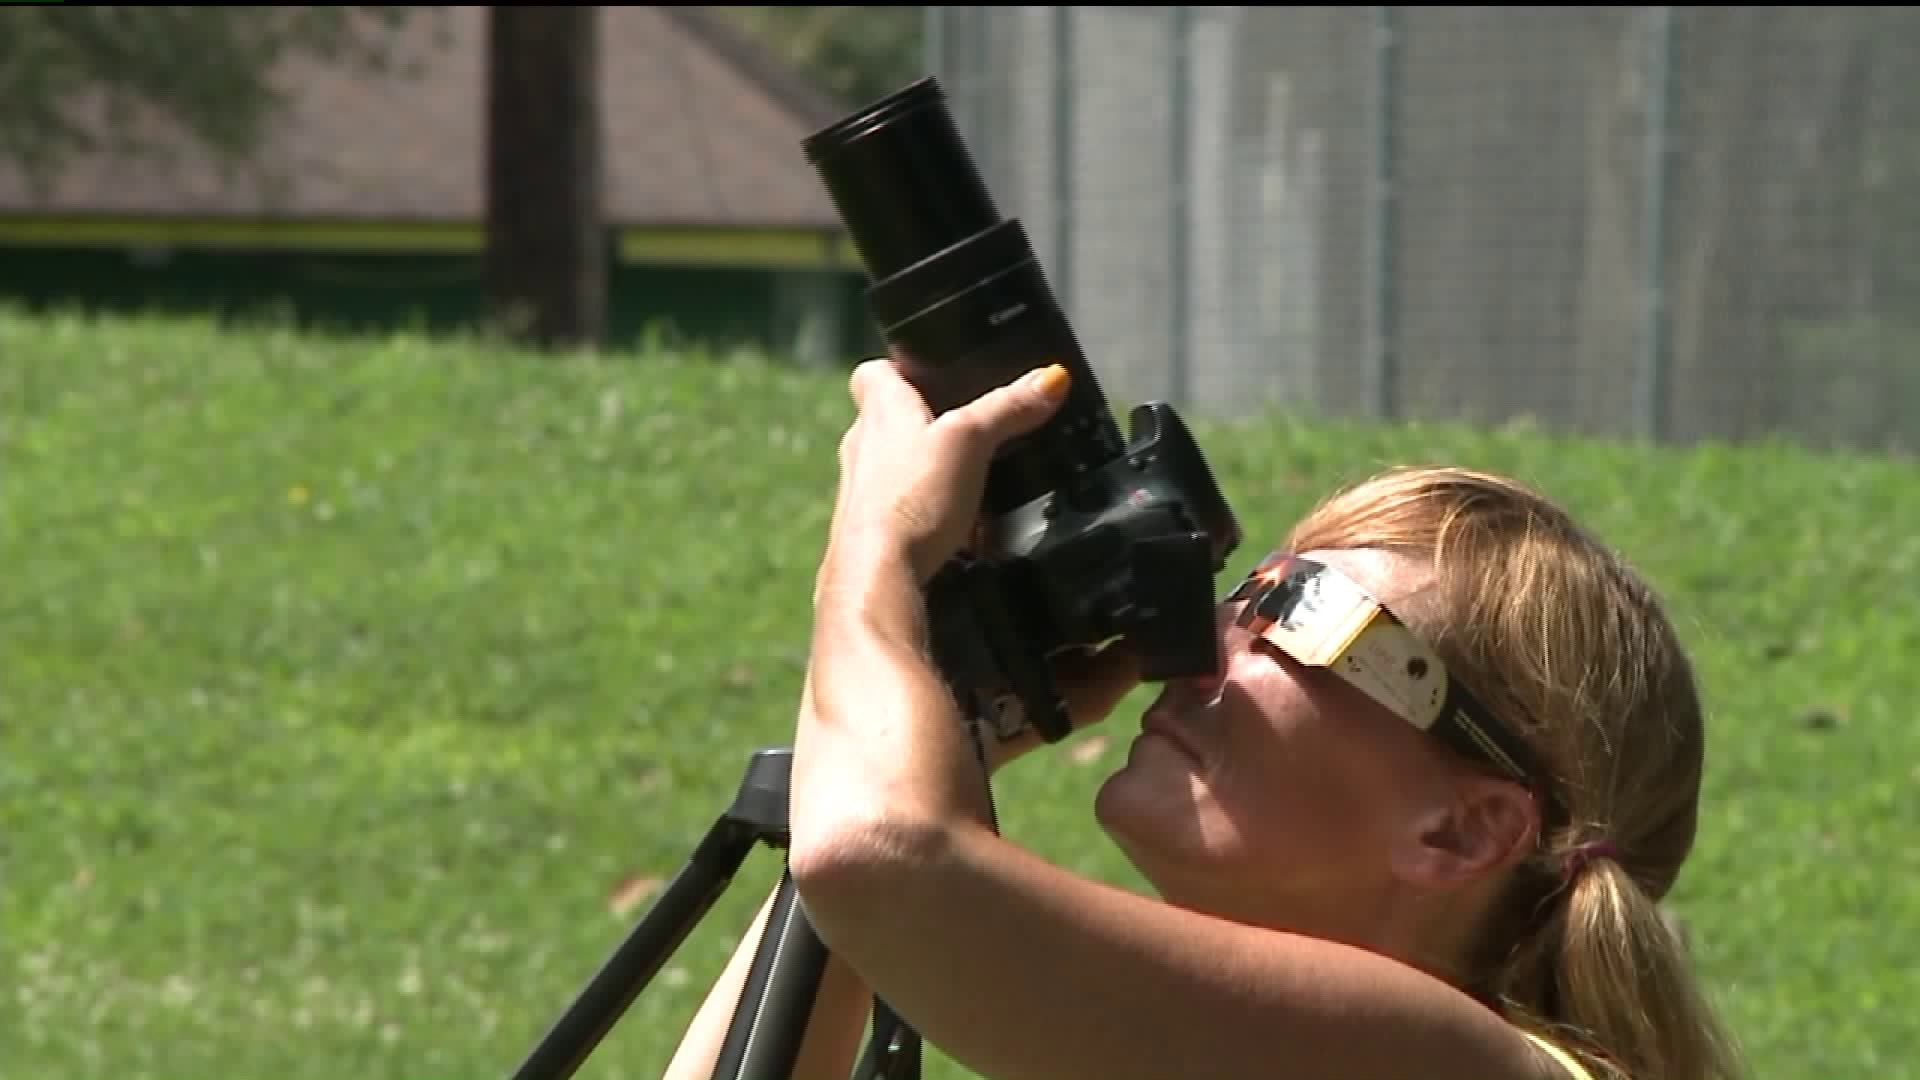 Professional Photographer Captures Beauty of Eclipse in Kirby Park